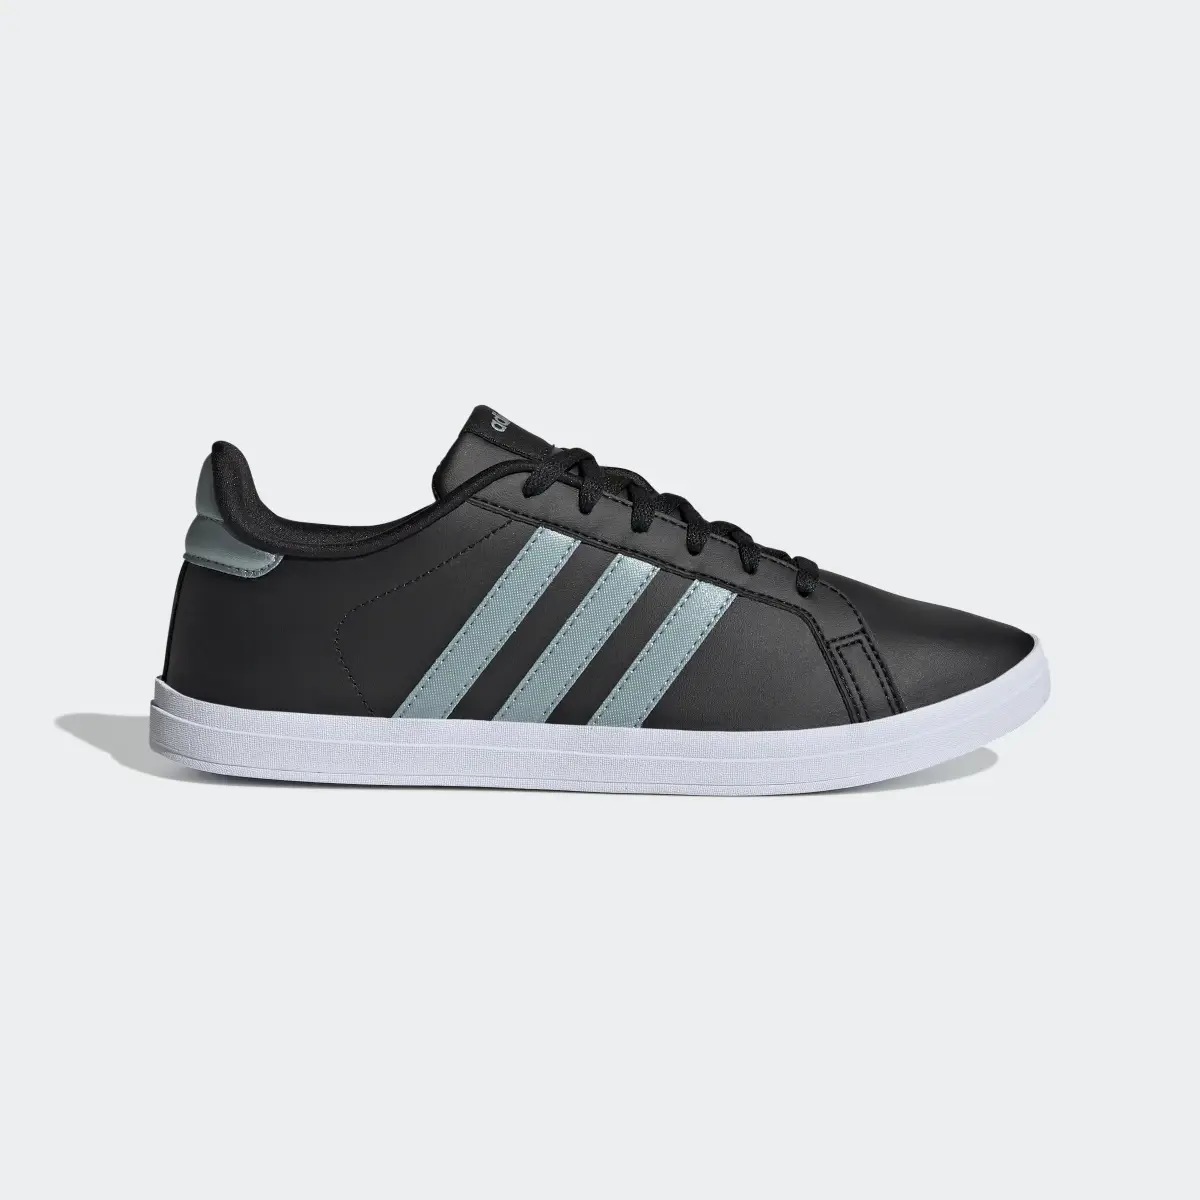 Adidas Courtpoint Shoes. 2